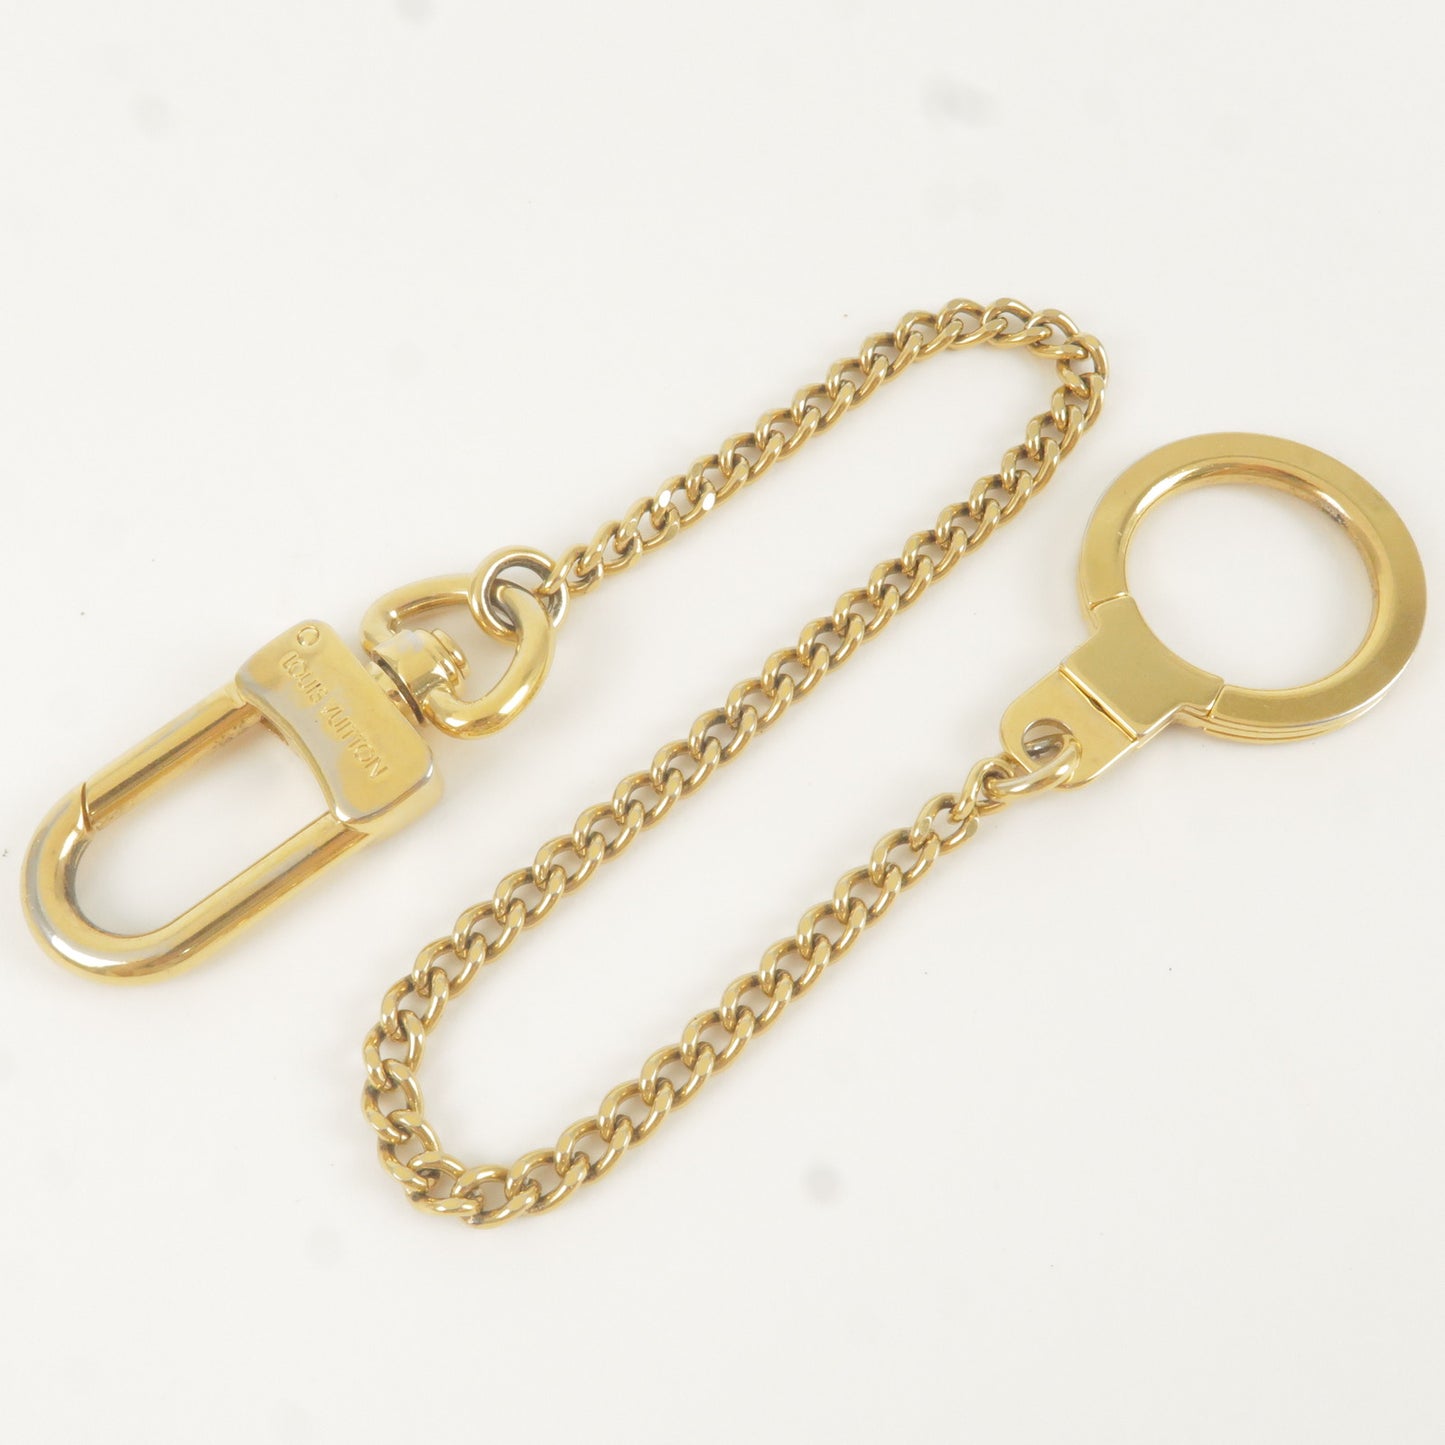 LOUIS VUITTON Used Key Chain Holder Gold Vintage Authentic Extender